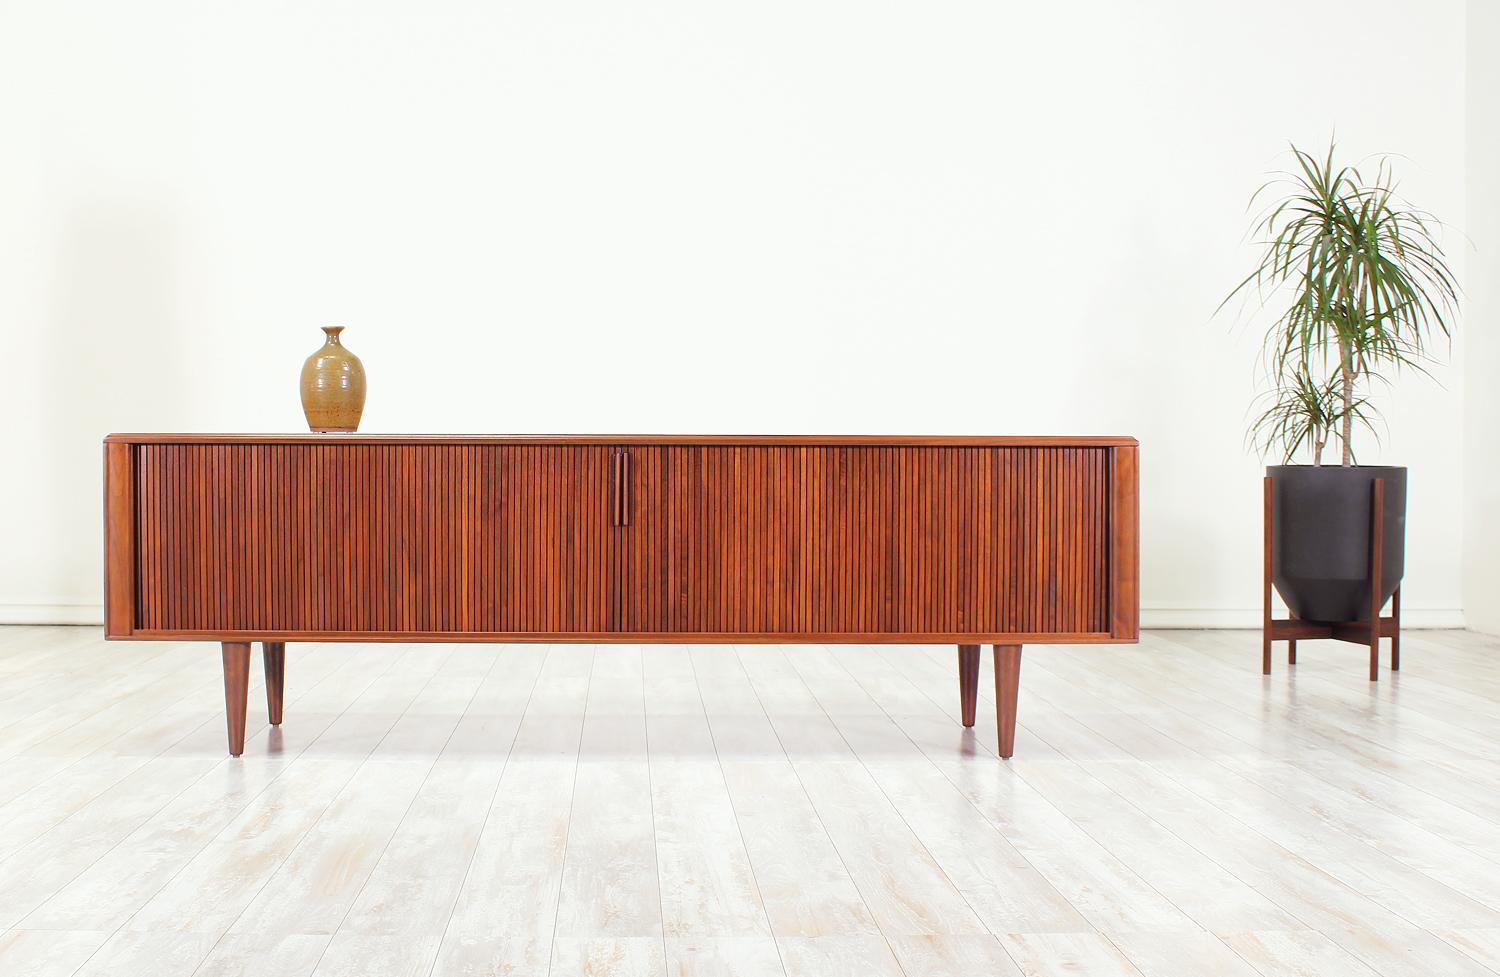 Mid-Century Modern Tambour Door Credenza designed and manufactured in the United States by Barzilay in the 1960’s. Low in profile, this beautifully refinished walnut storage unit is accented with inconspicuously slatted door pulls for functional